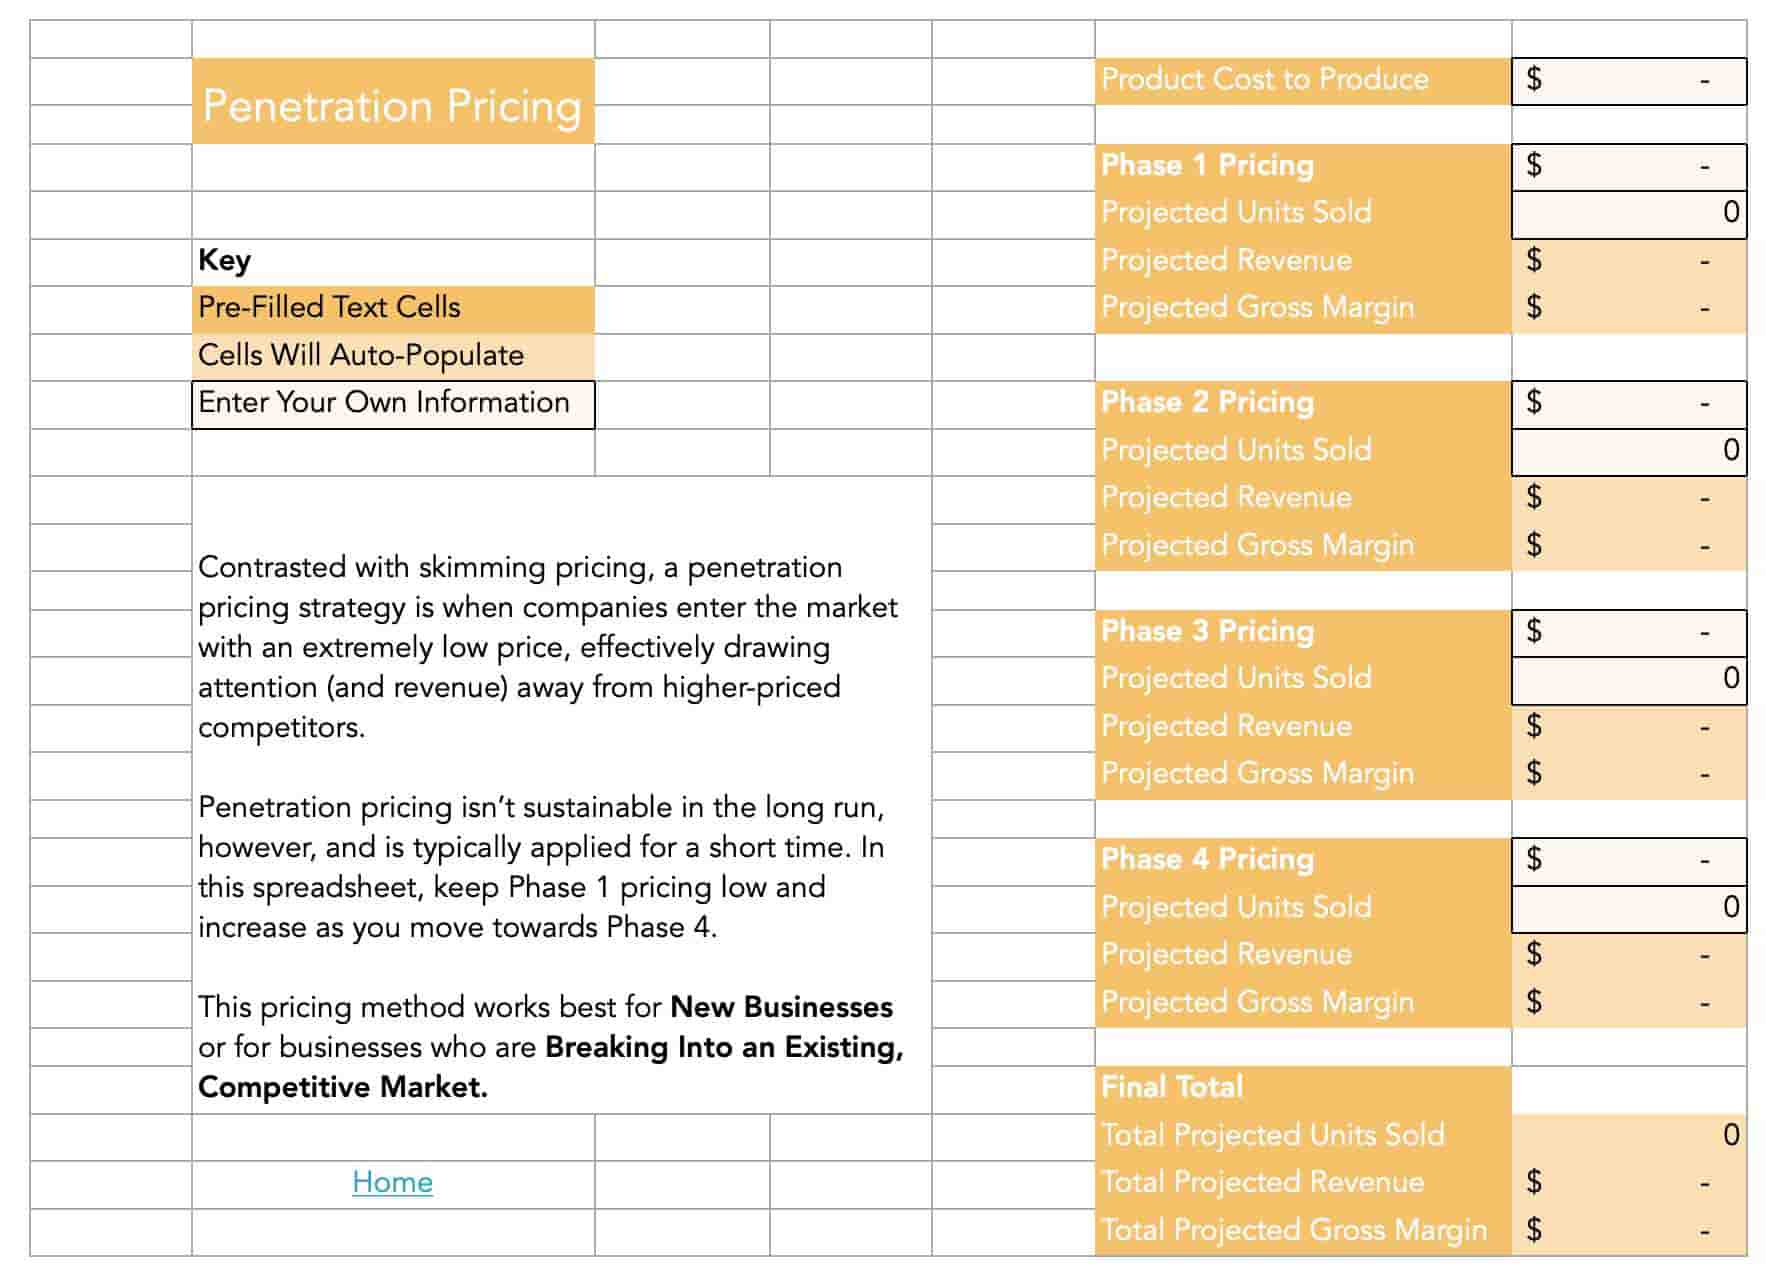 How to price a SaaS product, penetration pricing calculator example.